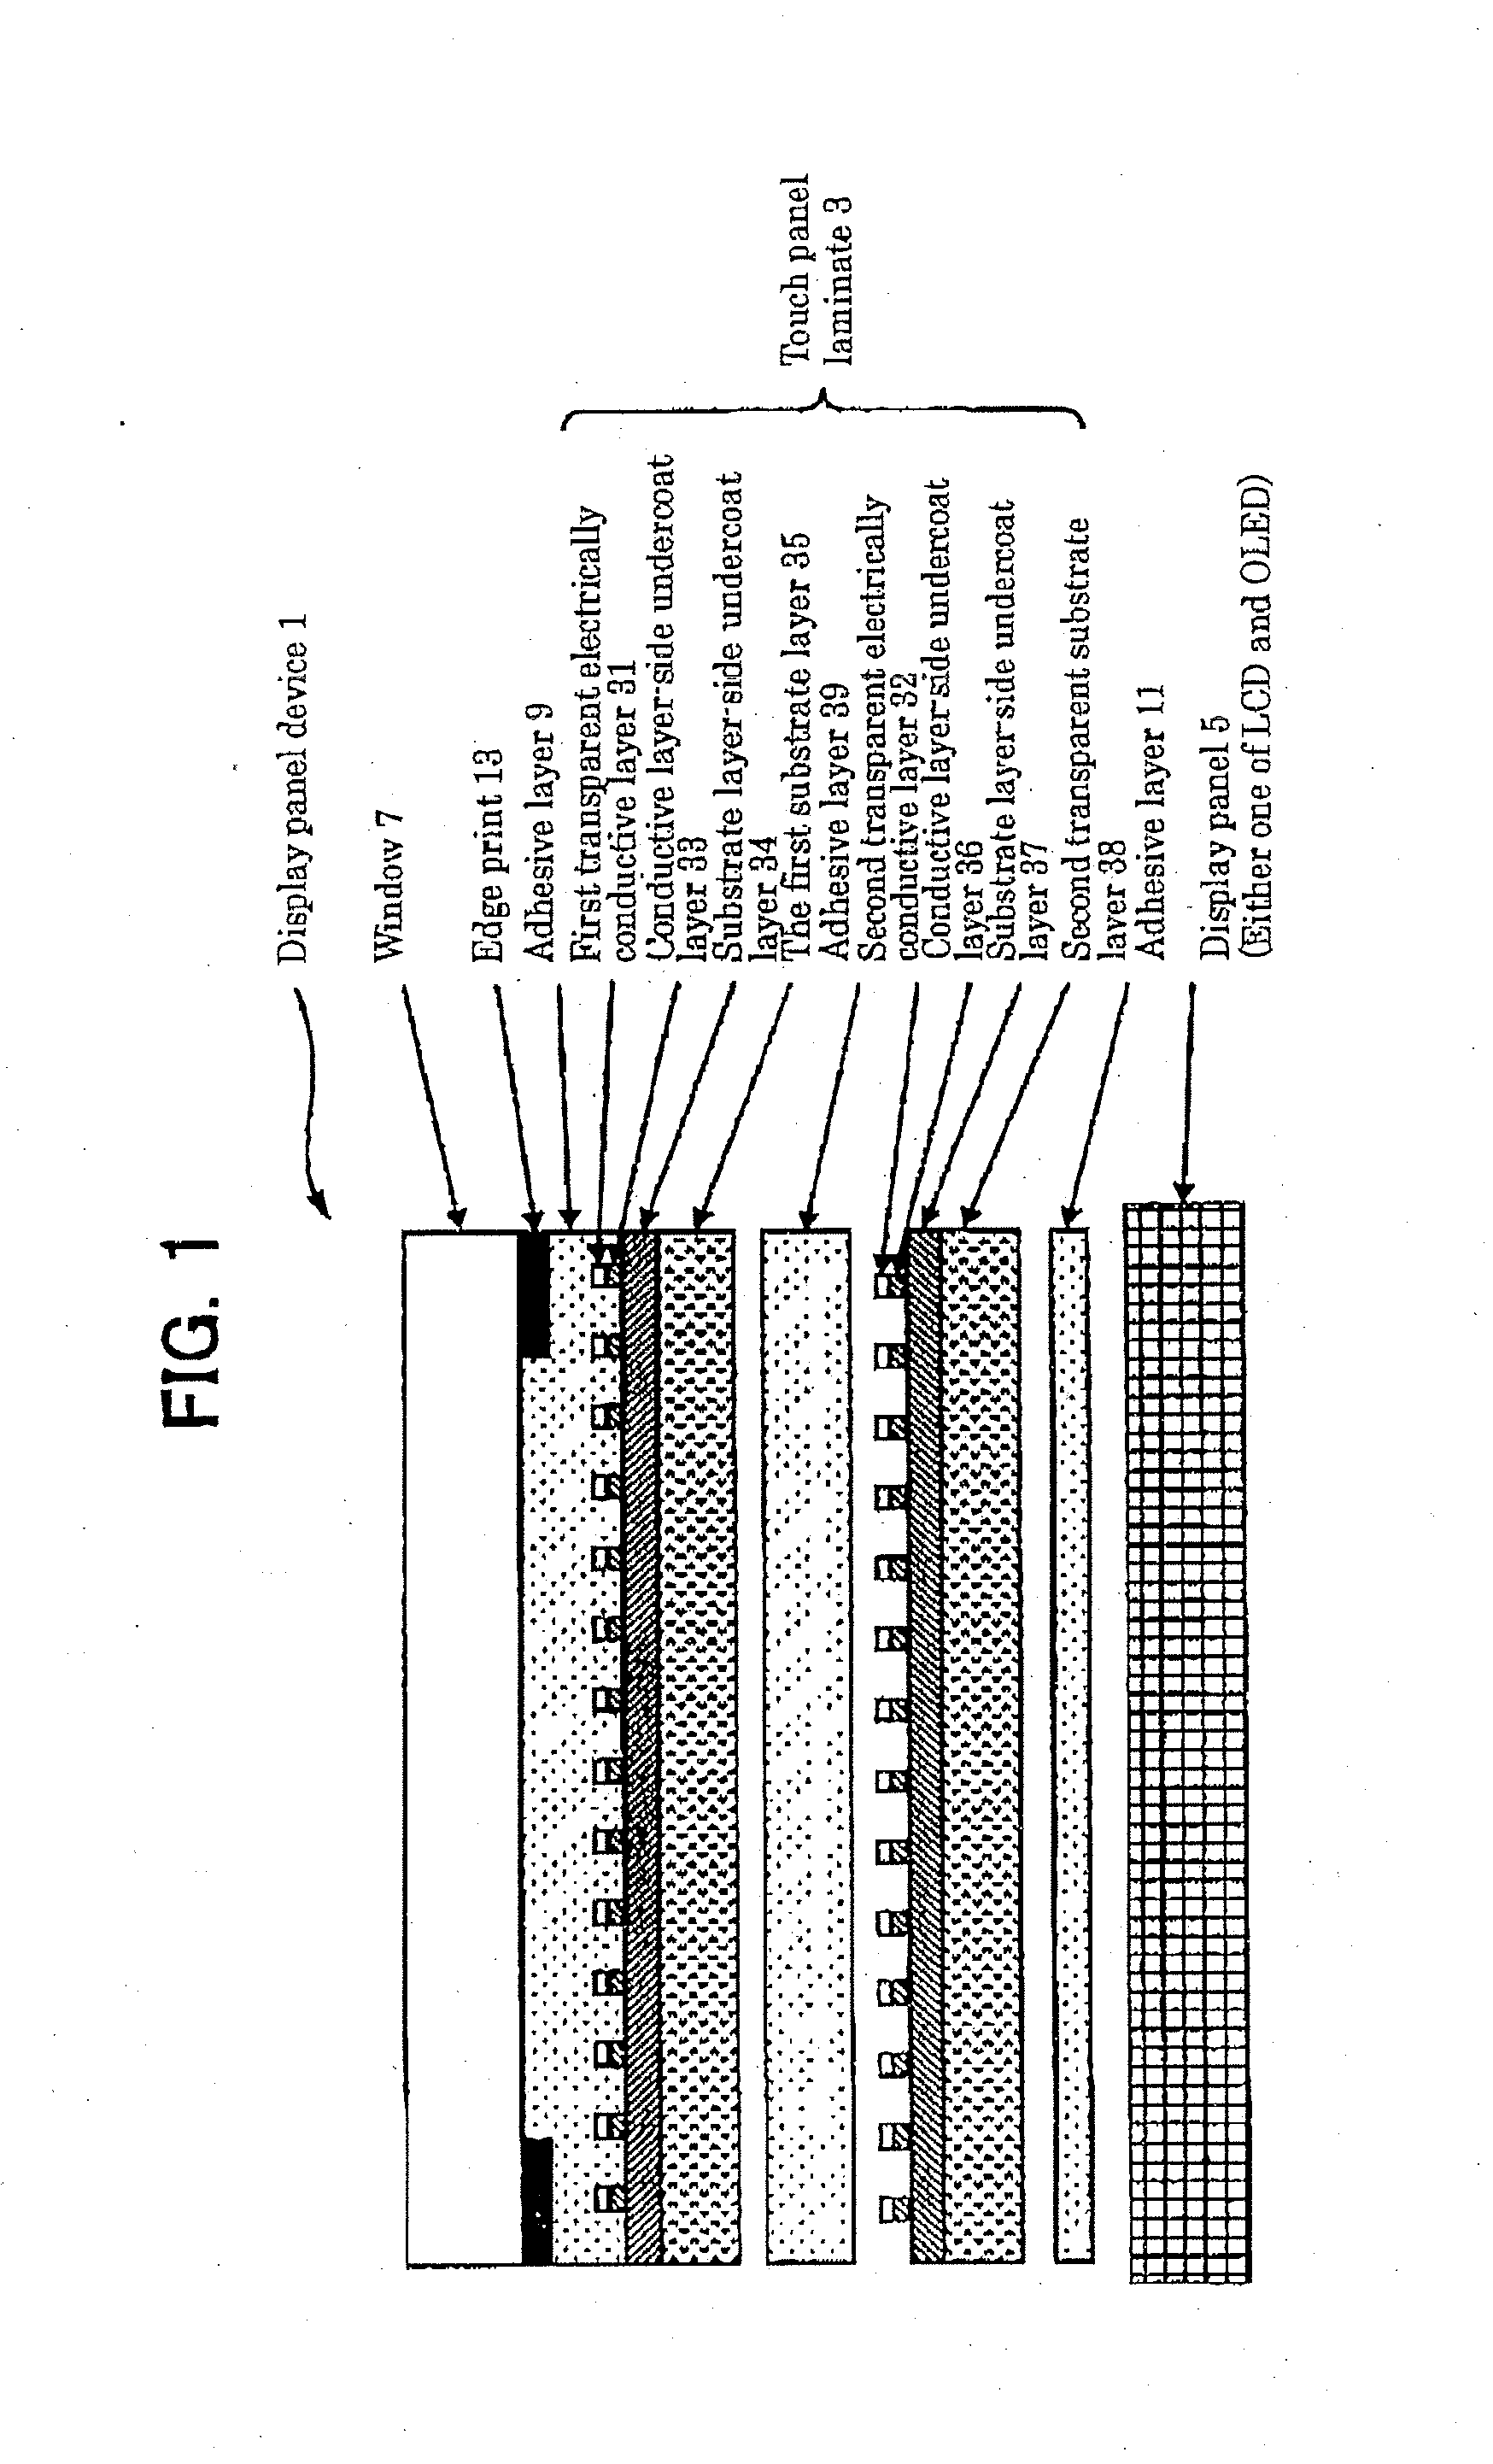 Display Panel Device Having Touch Input Function